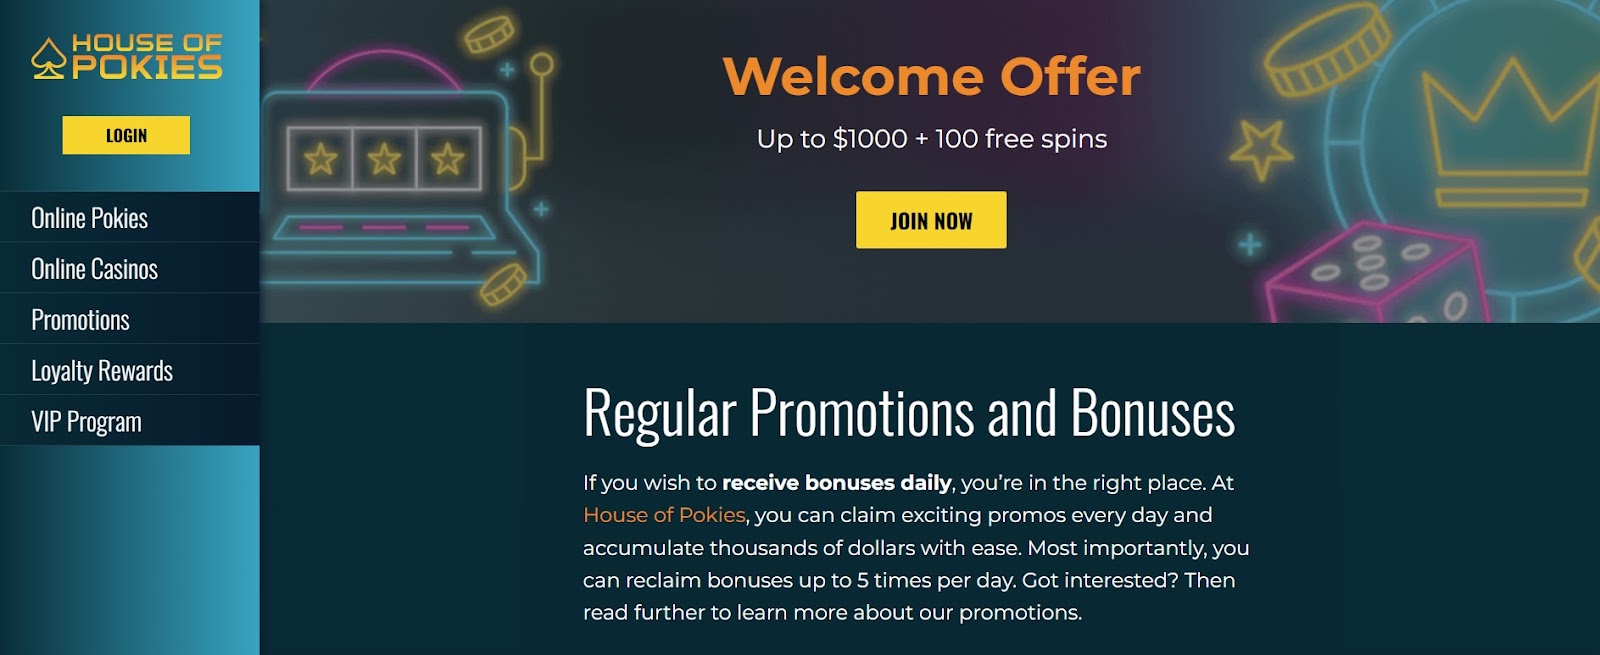 House Of Pokies Casino – A 1,000 AUD Welcome Package and Other Promos 3